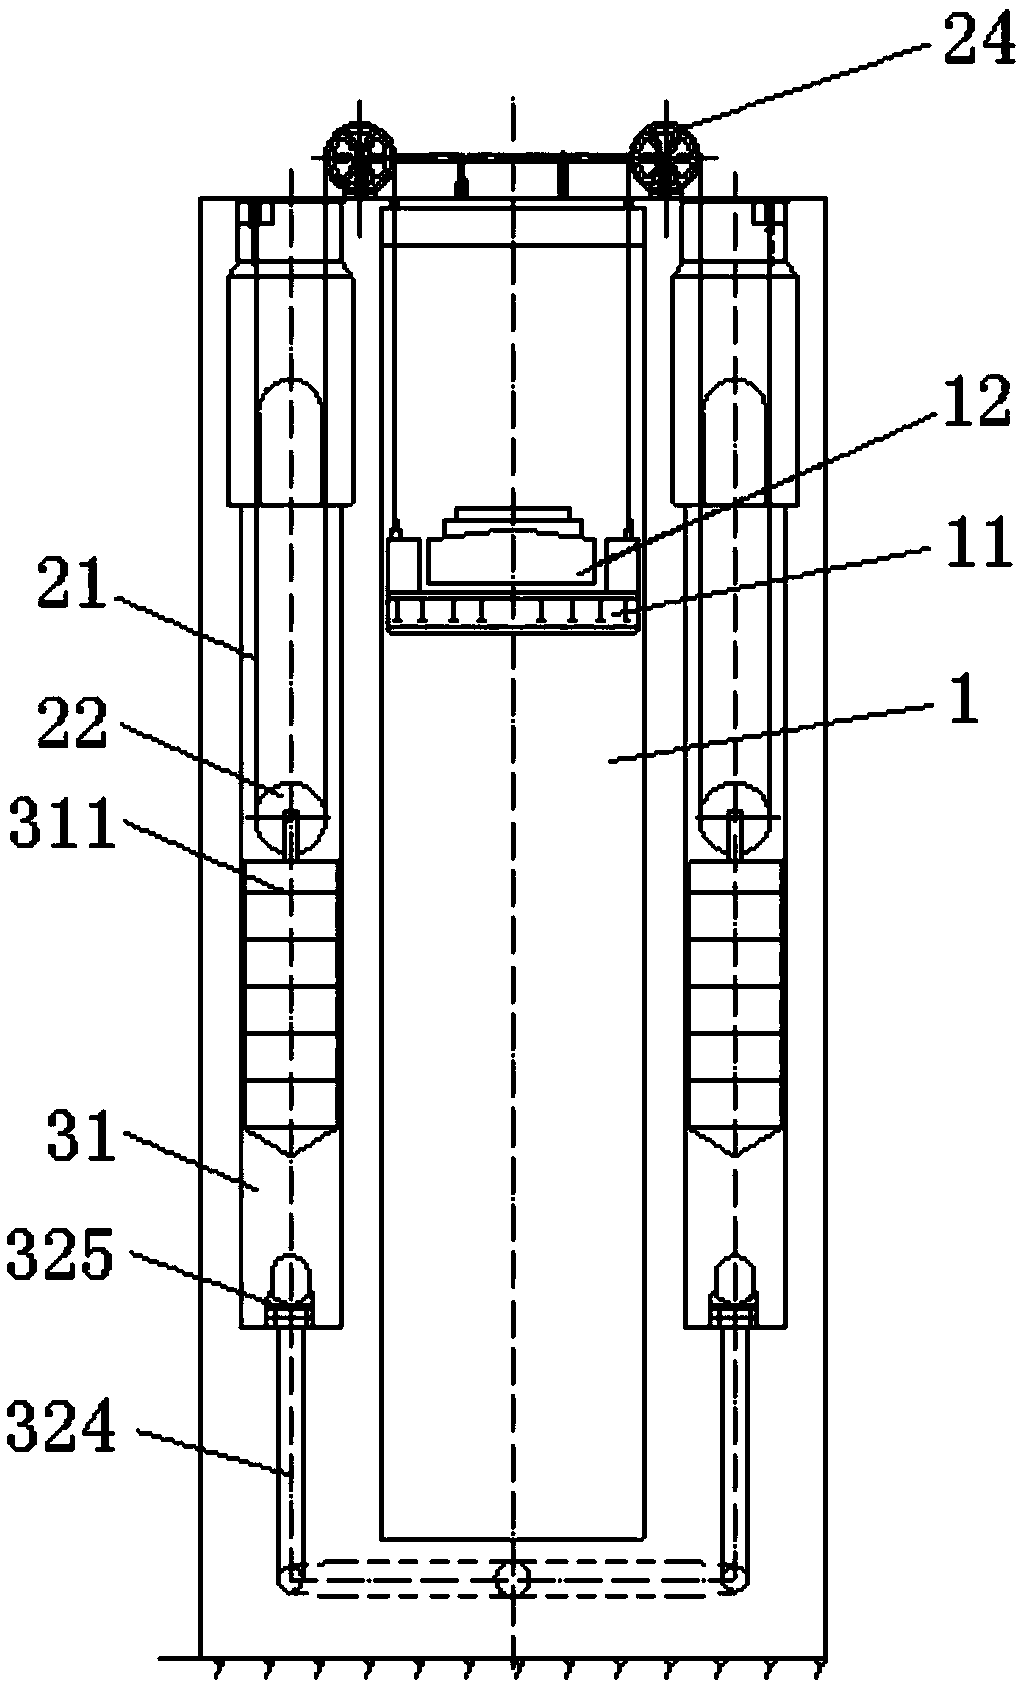 Capsizing-resistant hydraulic power type ship elevator with stable balanced hydraulic driving system